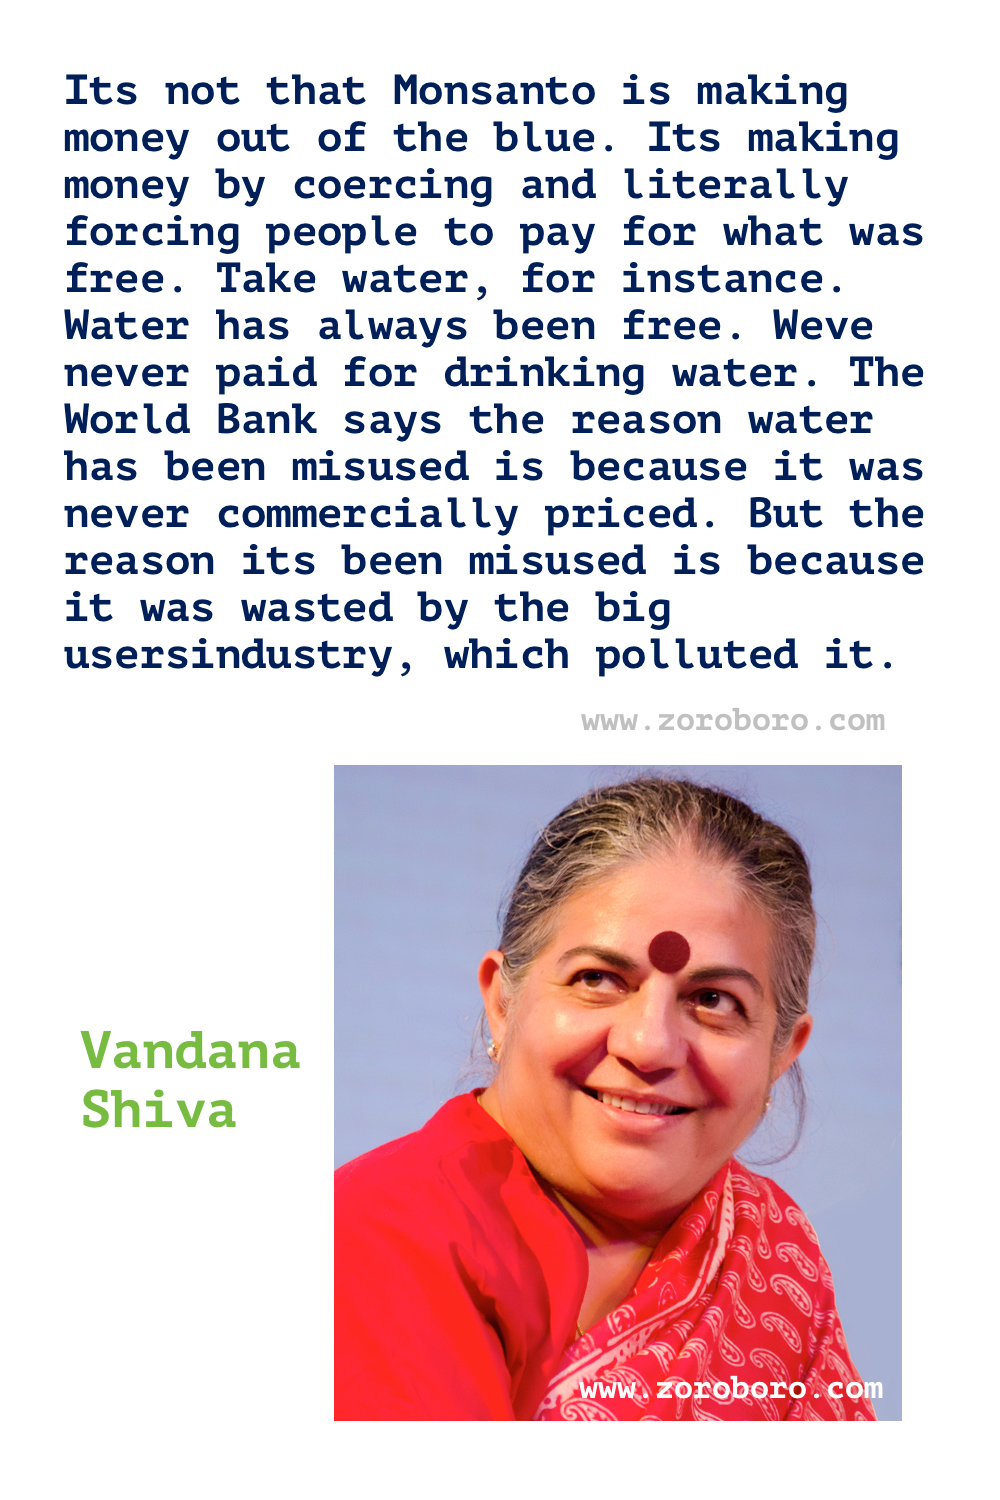 Vandana Shiva Quotes. Vandana Shiva on Environment Quotes, Agriculture Quotes, Nature Quotes, Earth Quotes, Democracy Quotes & Soil Quotes. Vandana Shiva Quotes,Biodiversity,Conservation,Country,Culture,Democracy,Diversity,Drinking,Earth,Ecology,Economy,Energy,Fathers,Giving,Globalization,Growth,Healing,Home,Humanity,Innovation,Justice,Mothers,Physics,Property,Responsibility,Royalty,Survival,Sustainability,Today,Trade,Violence,War,Water,Wilderness